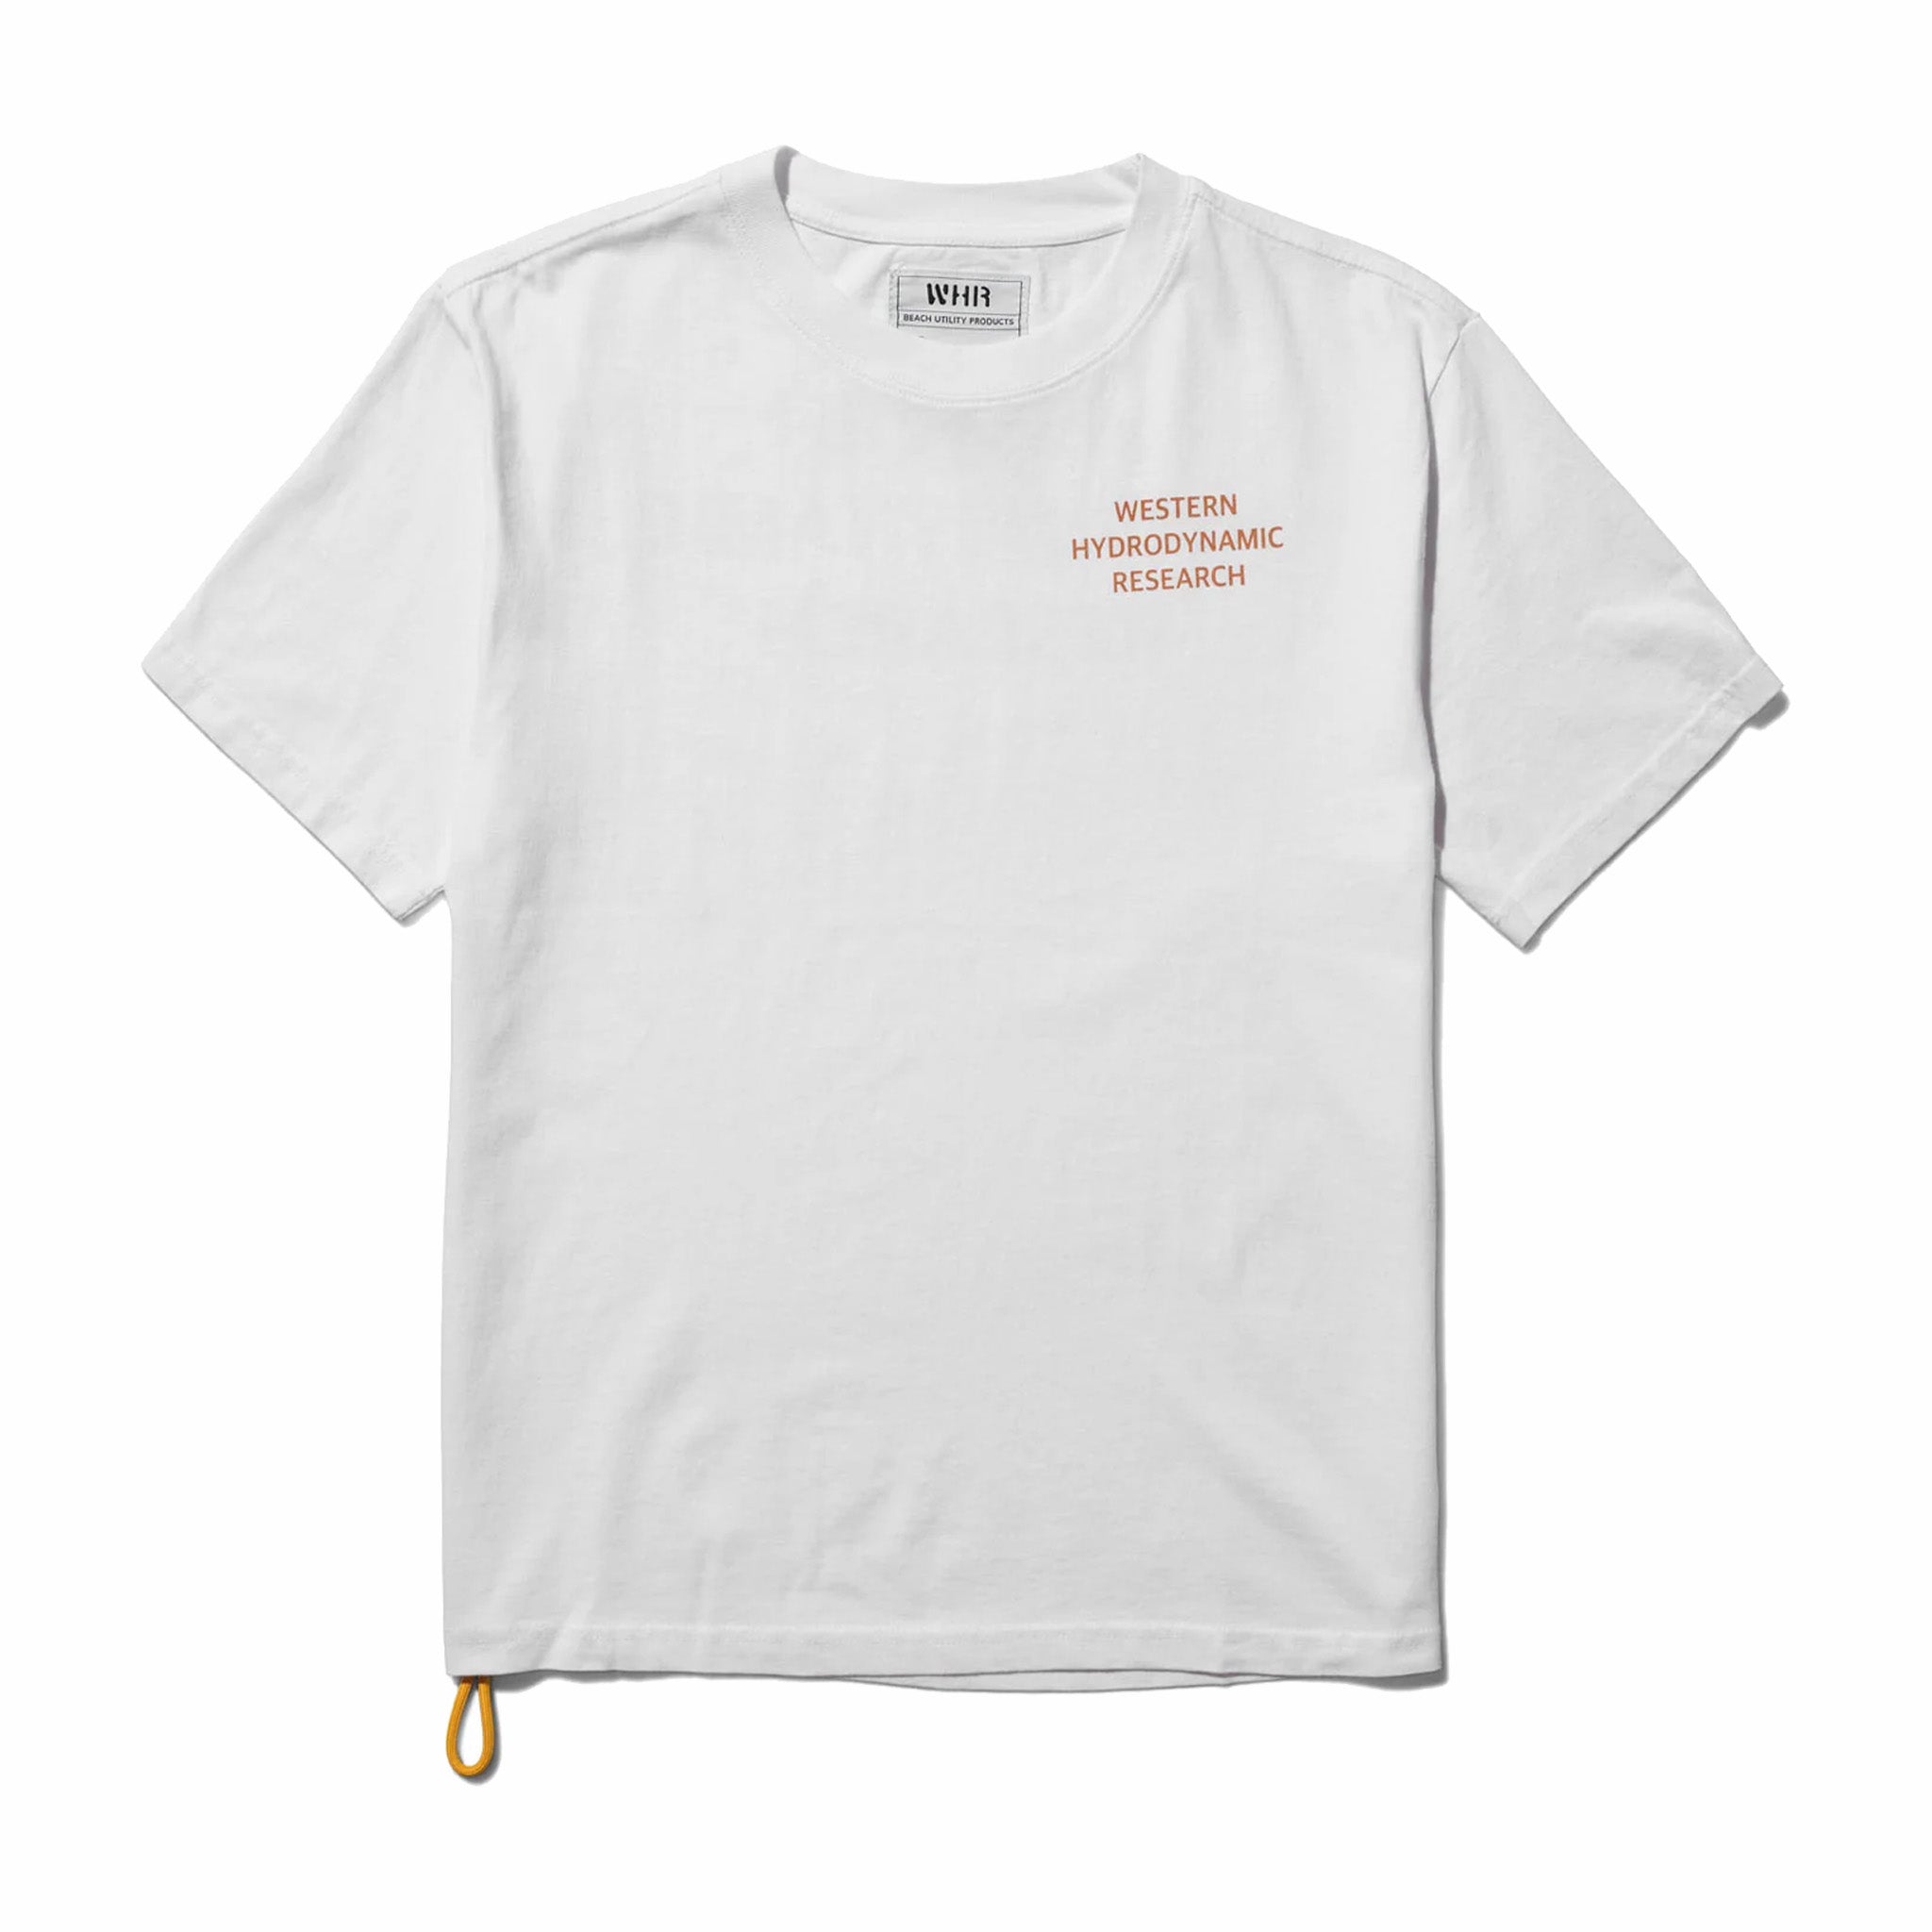 Western Hydrodynamic Research Worker Tee (White) - August Shop